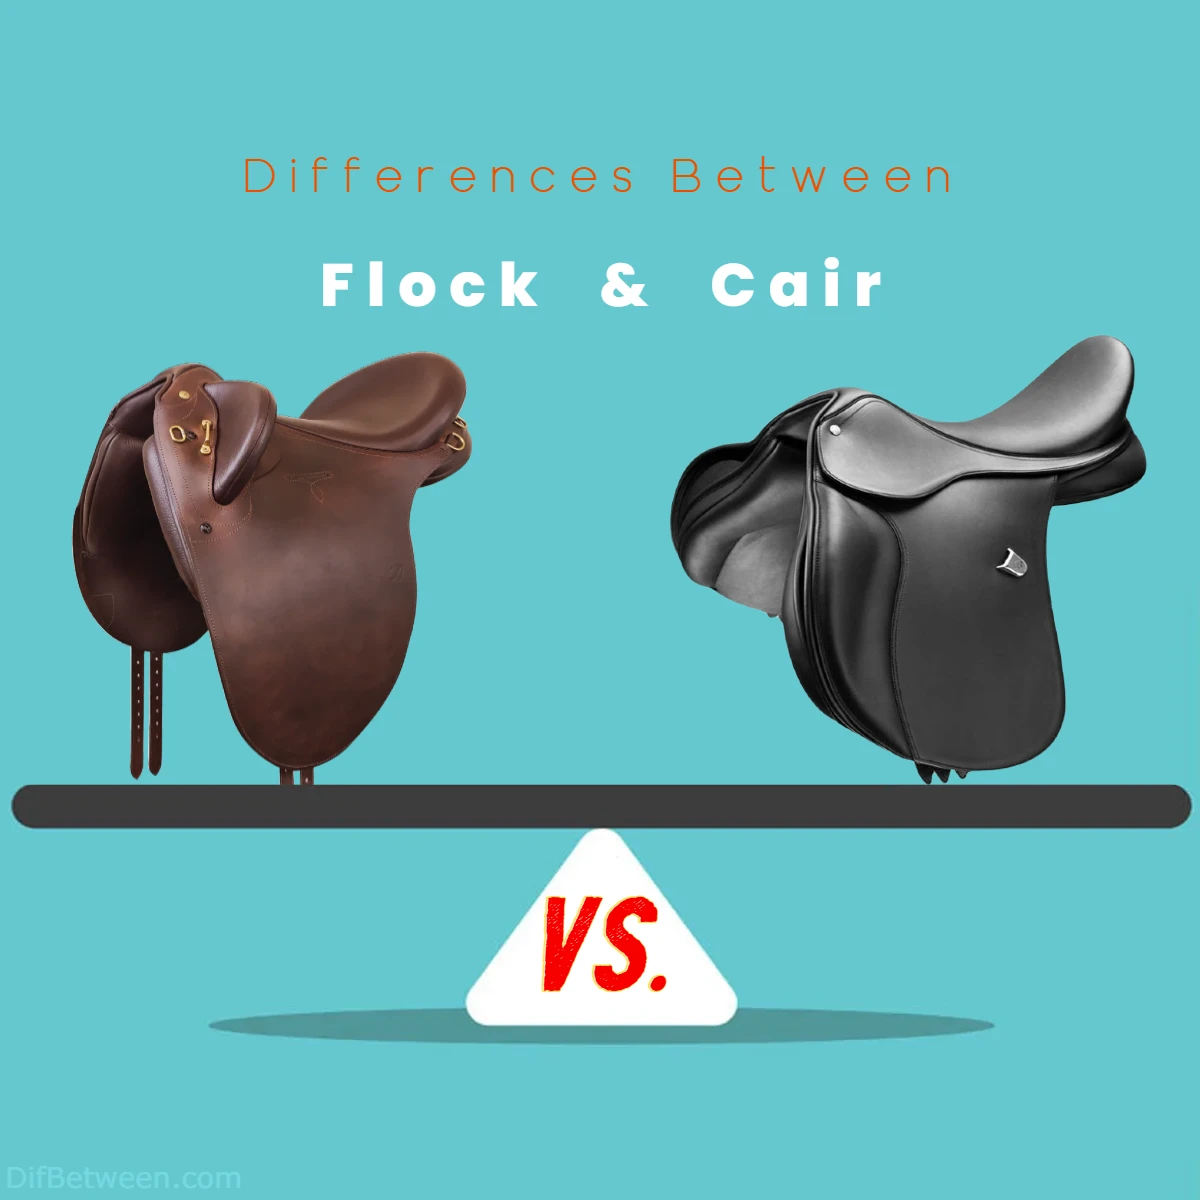 Differences Between Flock vs Cair